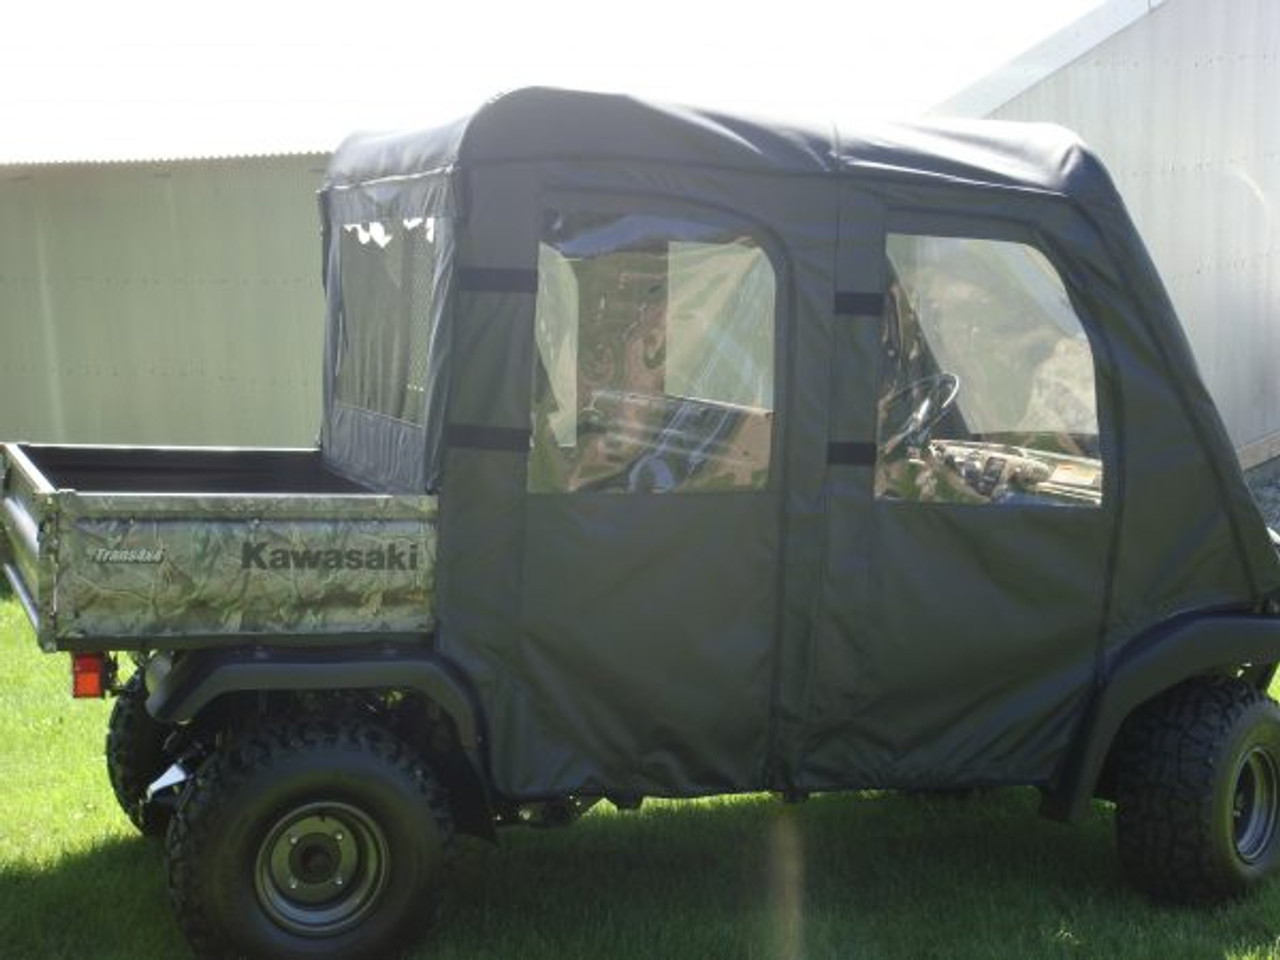 3 Star side x side Kawasaki Mule 3000/3010 Trans doors and rear window rear and side angle view